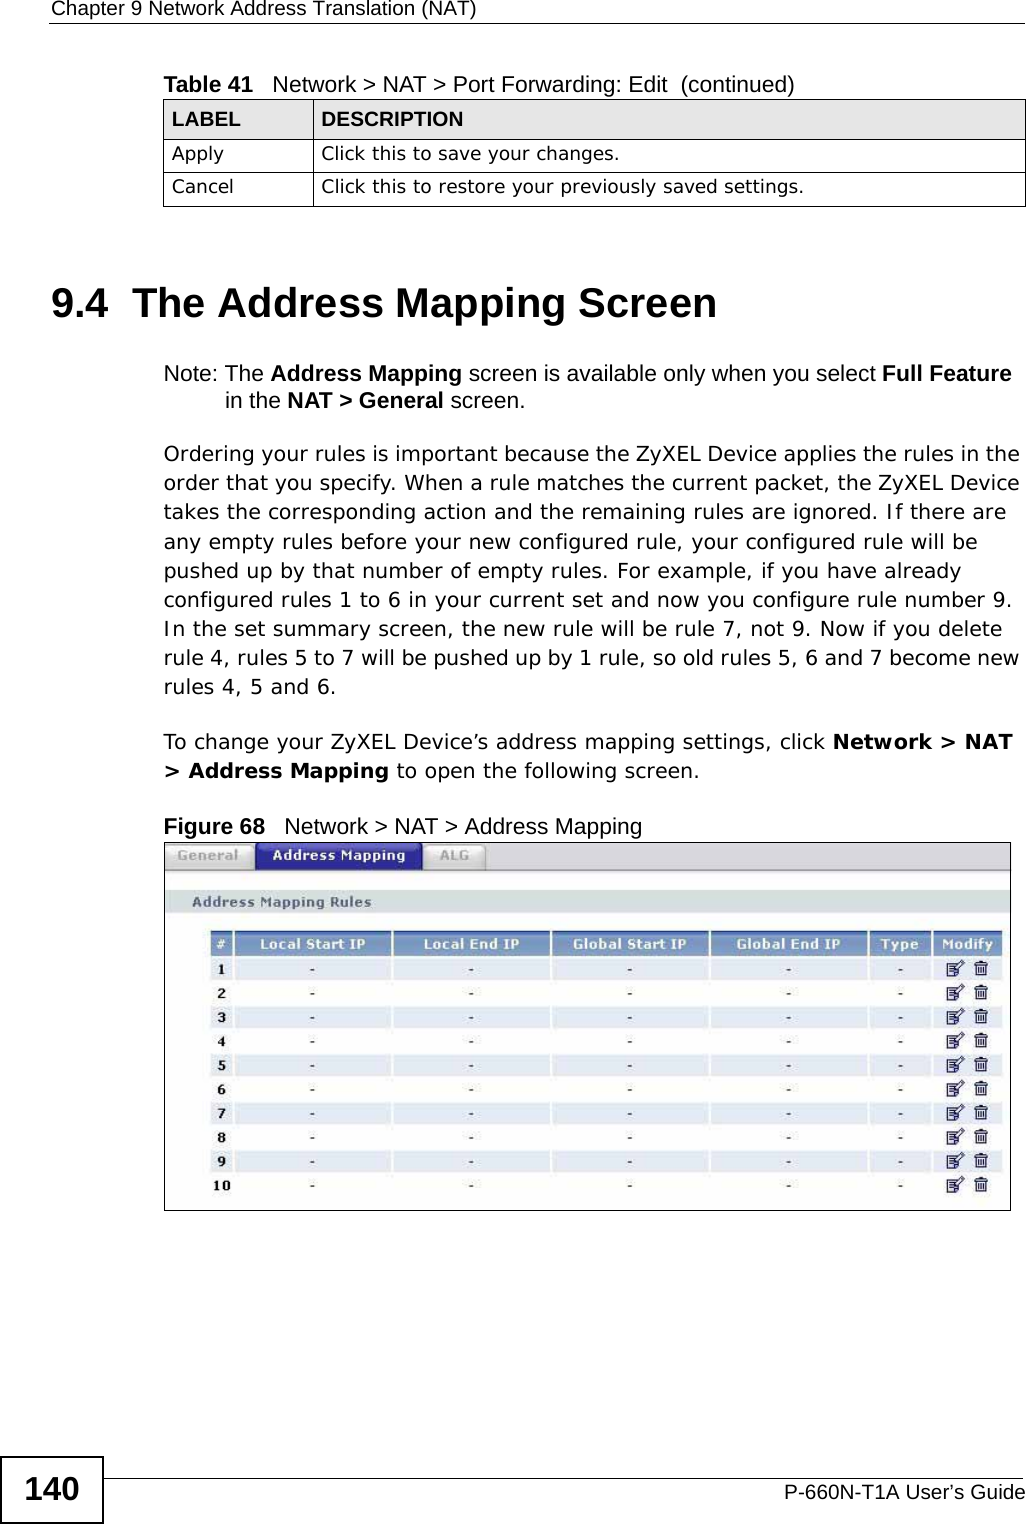 Chapter 9 Network Address Translation (NAT)P-660N-T1A User’s Guide1409.4  The Address Mapping ScreenNote: The Address Mapping screen is available only when you select Full Feature in the NAT &gt; General screen.Ordering your rules is important because the ZyXEL Device applies the rules in the order that you specify. When a rule matches the current packet, the ZyXEL Device takes the corresponding action and the remaining rules are ignored. If there are any empty rules before your new configured rule, your configured rule will be pushed up by that number of empty rules. For example, if you have already configured rules 1 to 6 in your current set and now you configure rule number 9. In the set summary screen, the new rule will be rule 7, not 9. Now if you delete rule 4, rules 5 to 7 will be pushed up by 1 rule, so old rules 5, 6 and 7 become new rules 4, 5 and 6. To change your ZyXEL Device’s address mapping settings, click Network &gt; NAT &gt; Address Mapping to open the following screen.Figure 68   Network &gt; NAT &gt; Address MappingApply Click this to save your changes.Cancel Click this to restore your previously saved settings.Table 41   Network &gt; NAT &gt; Port Forwarding: Edit  (continued)LABEL DESCRIPTION